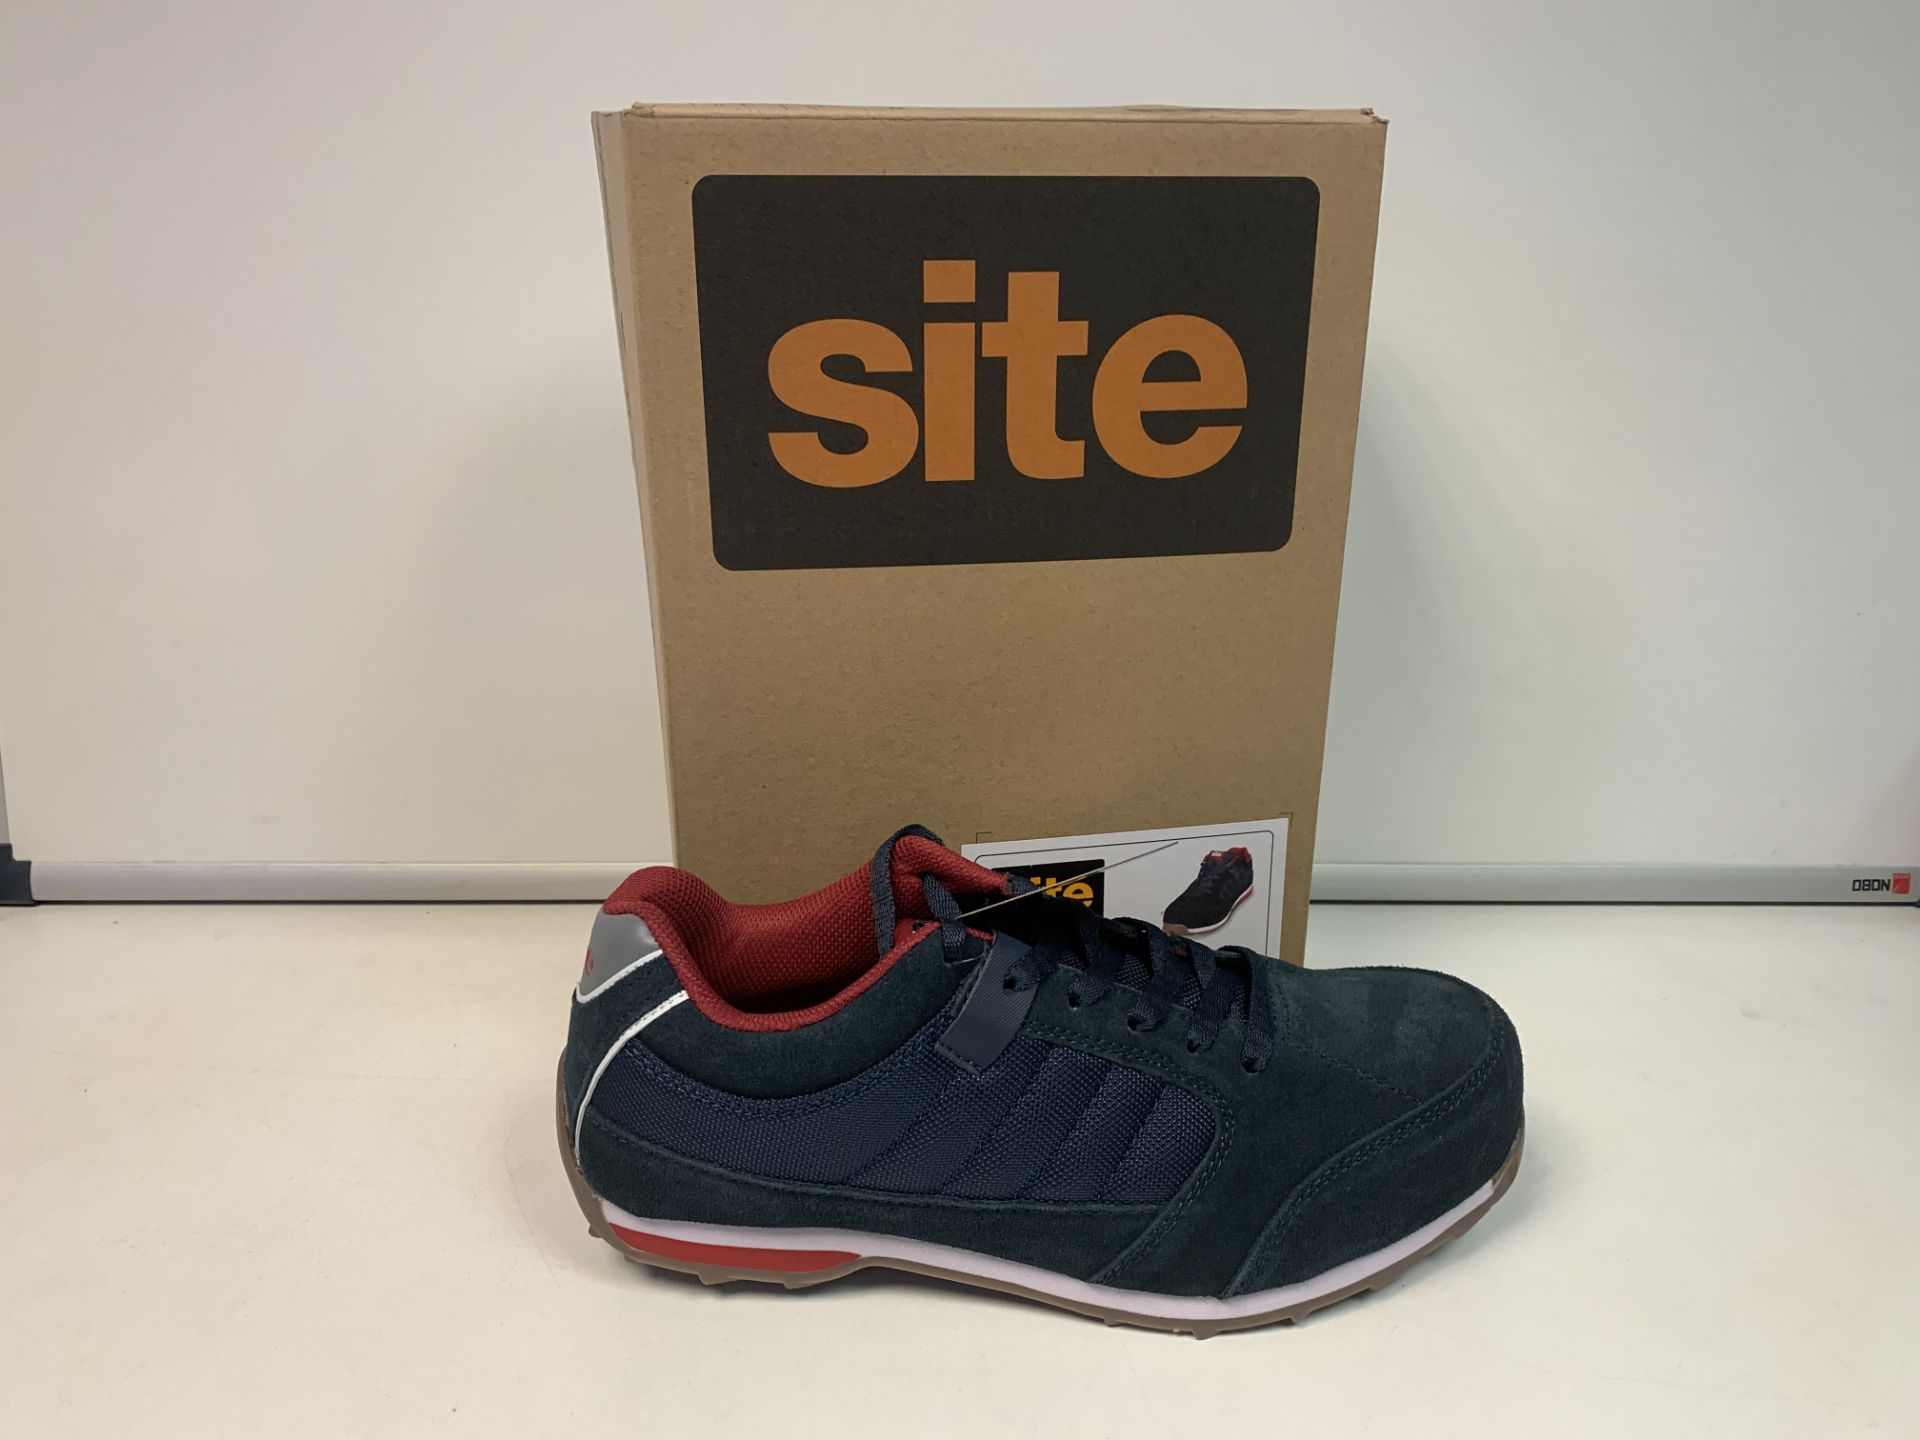 4 X NEW BOXED PAIRS OF STRETA SAFETY TRAINERS NAVY. SIZE 10. (ROW8) Suede leather and mesh upper.